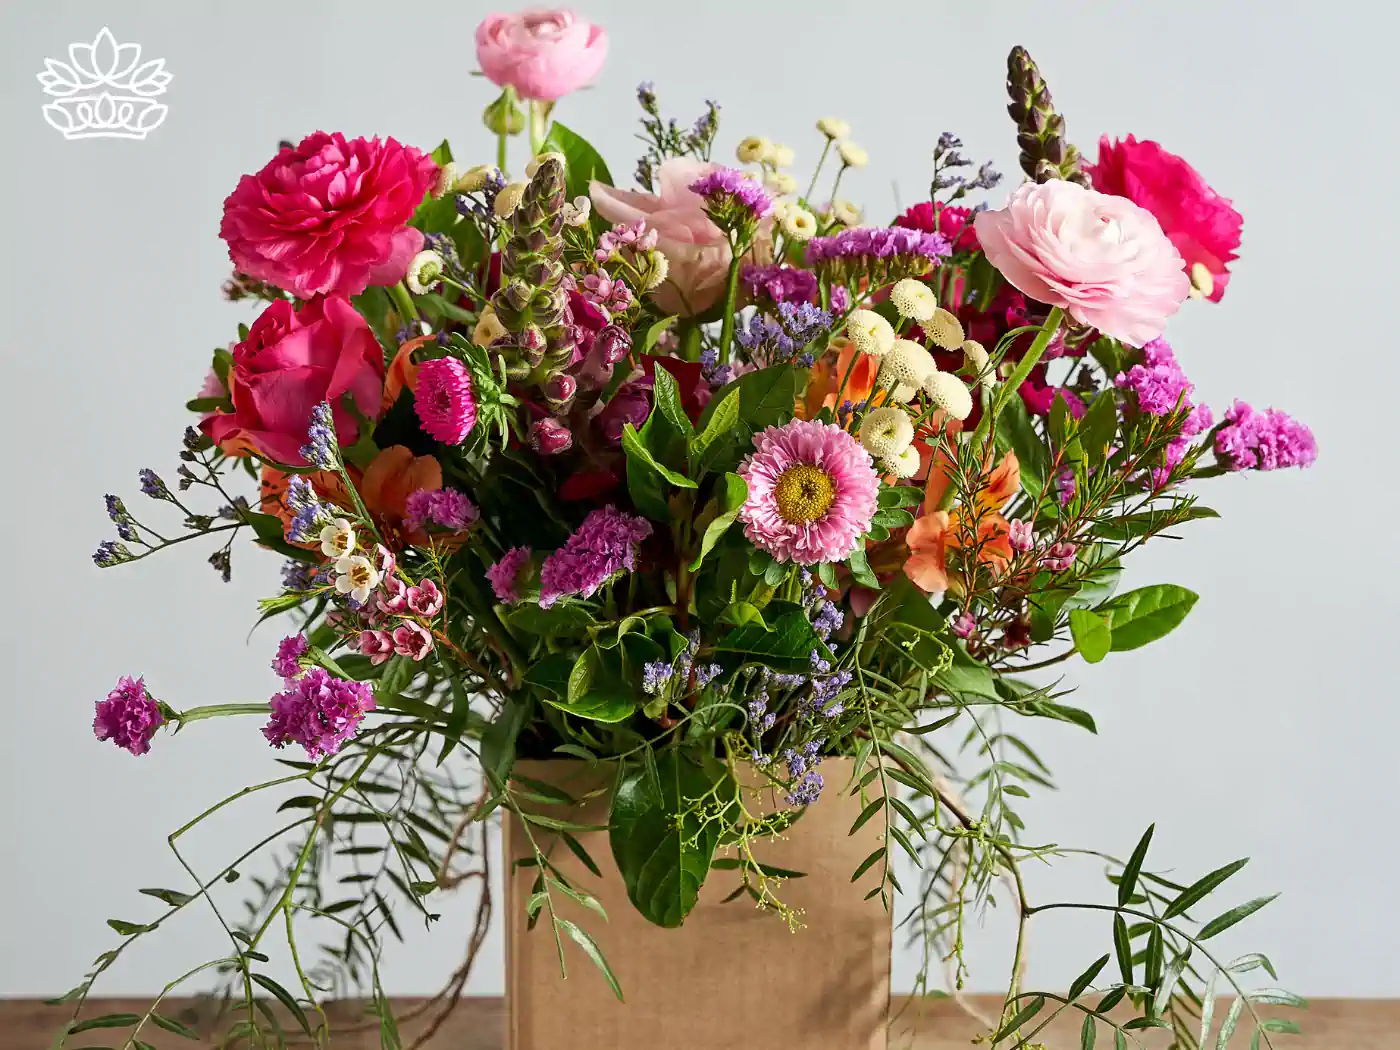 Vibrant get well bouquet in a rustic brown paper bag, brimming with pink roses, magenta blooms, and assorted fresh greenery, crafted to uplift spirits. Delivered with Heart. Fabulous Flowers and Gifts.